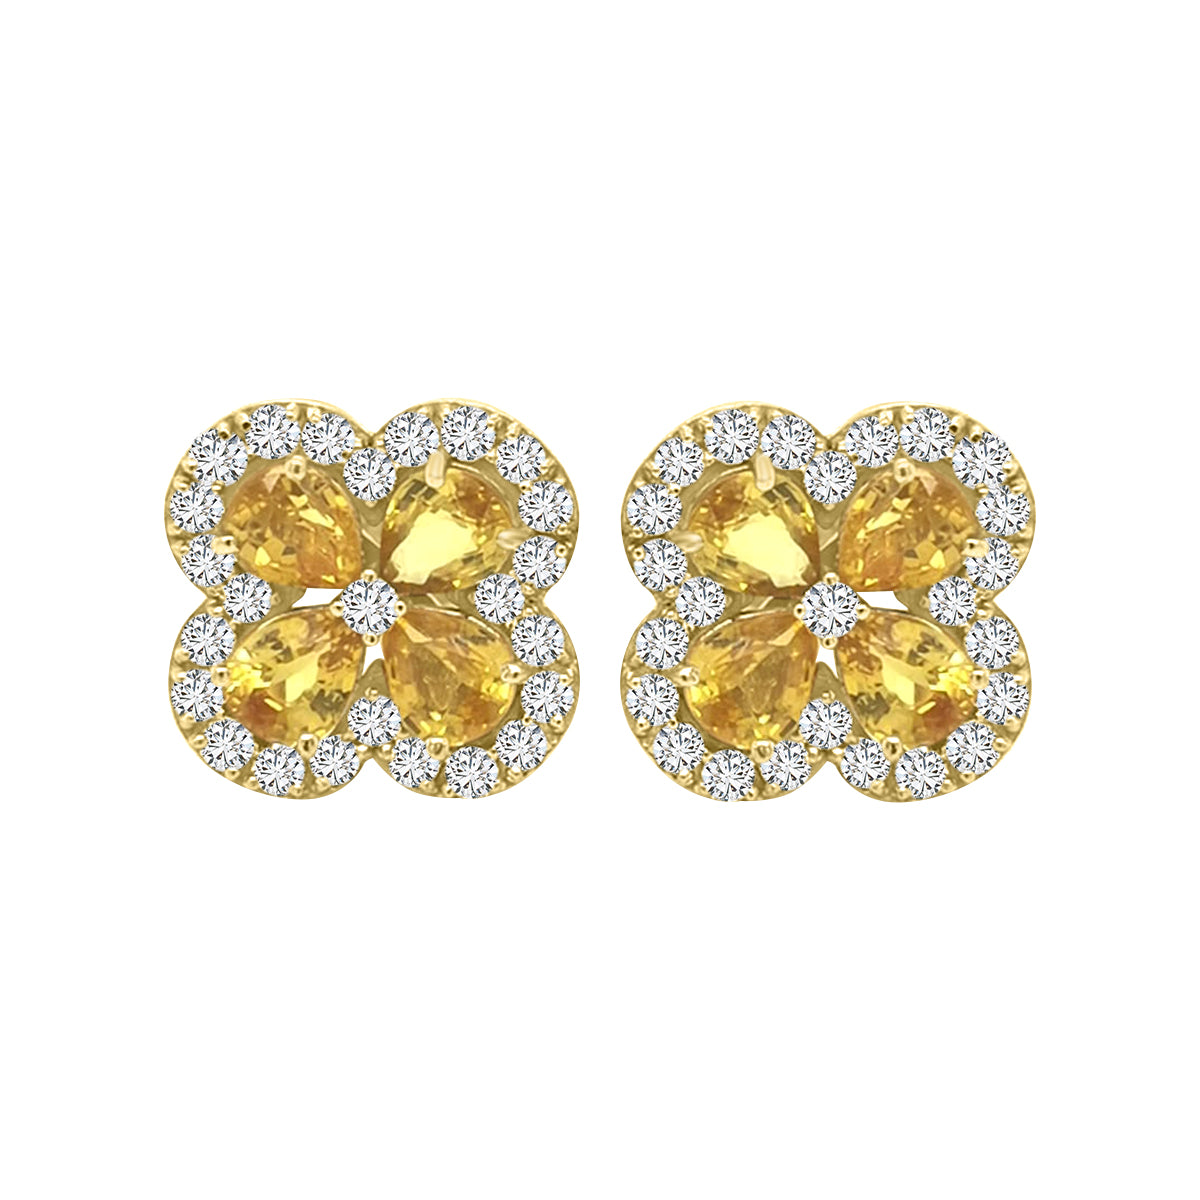 Flower Design Yellow sapphire And Diamond Stud Earrings In 18k Yellow Gold.